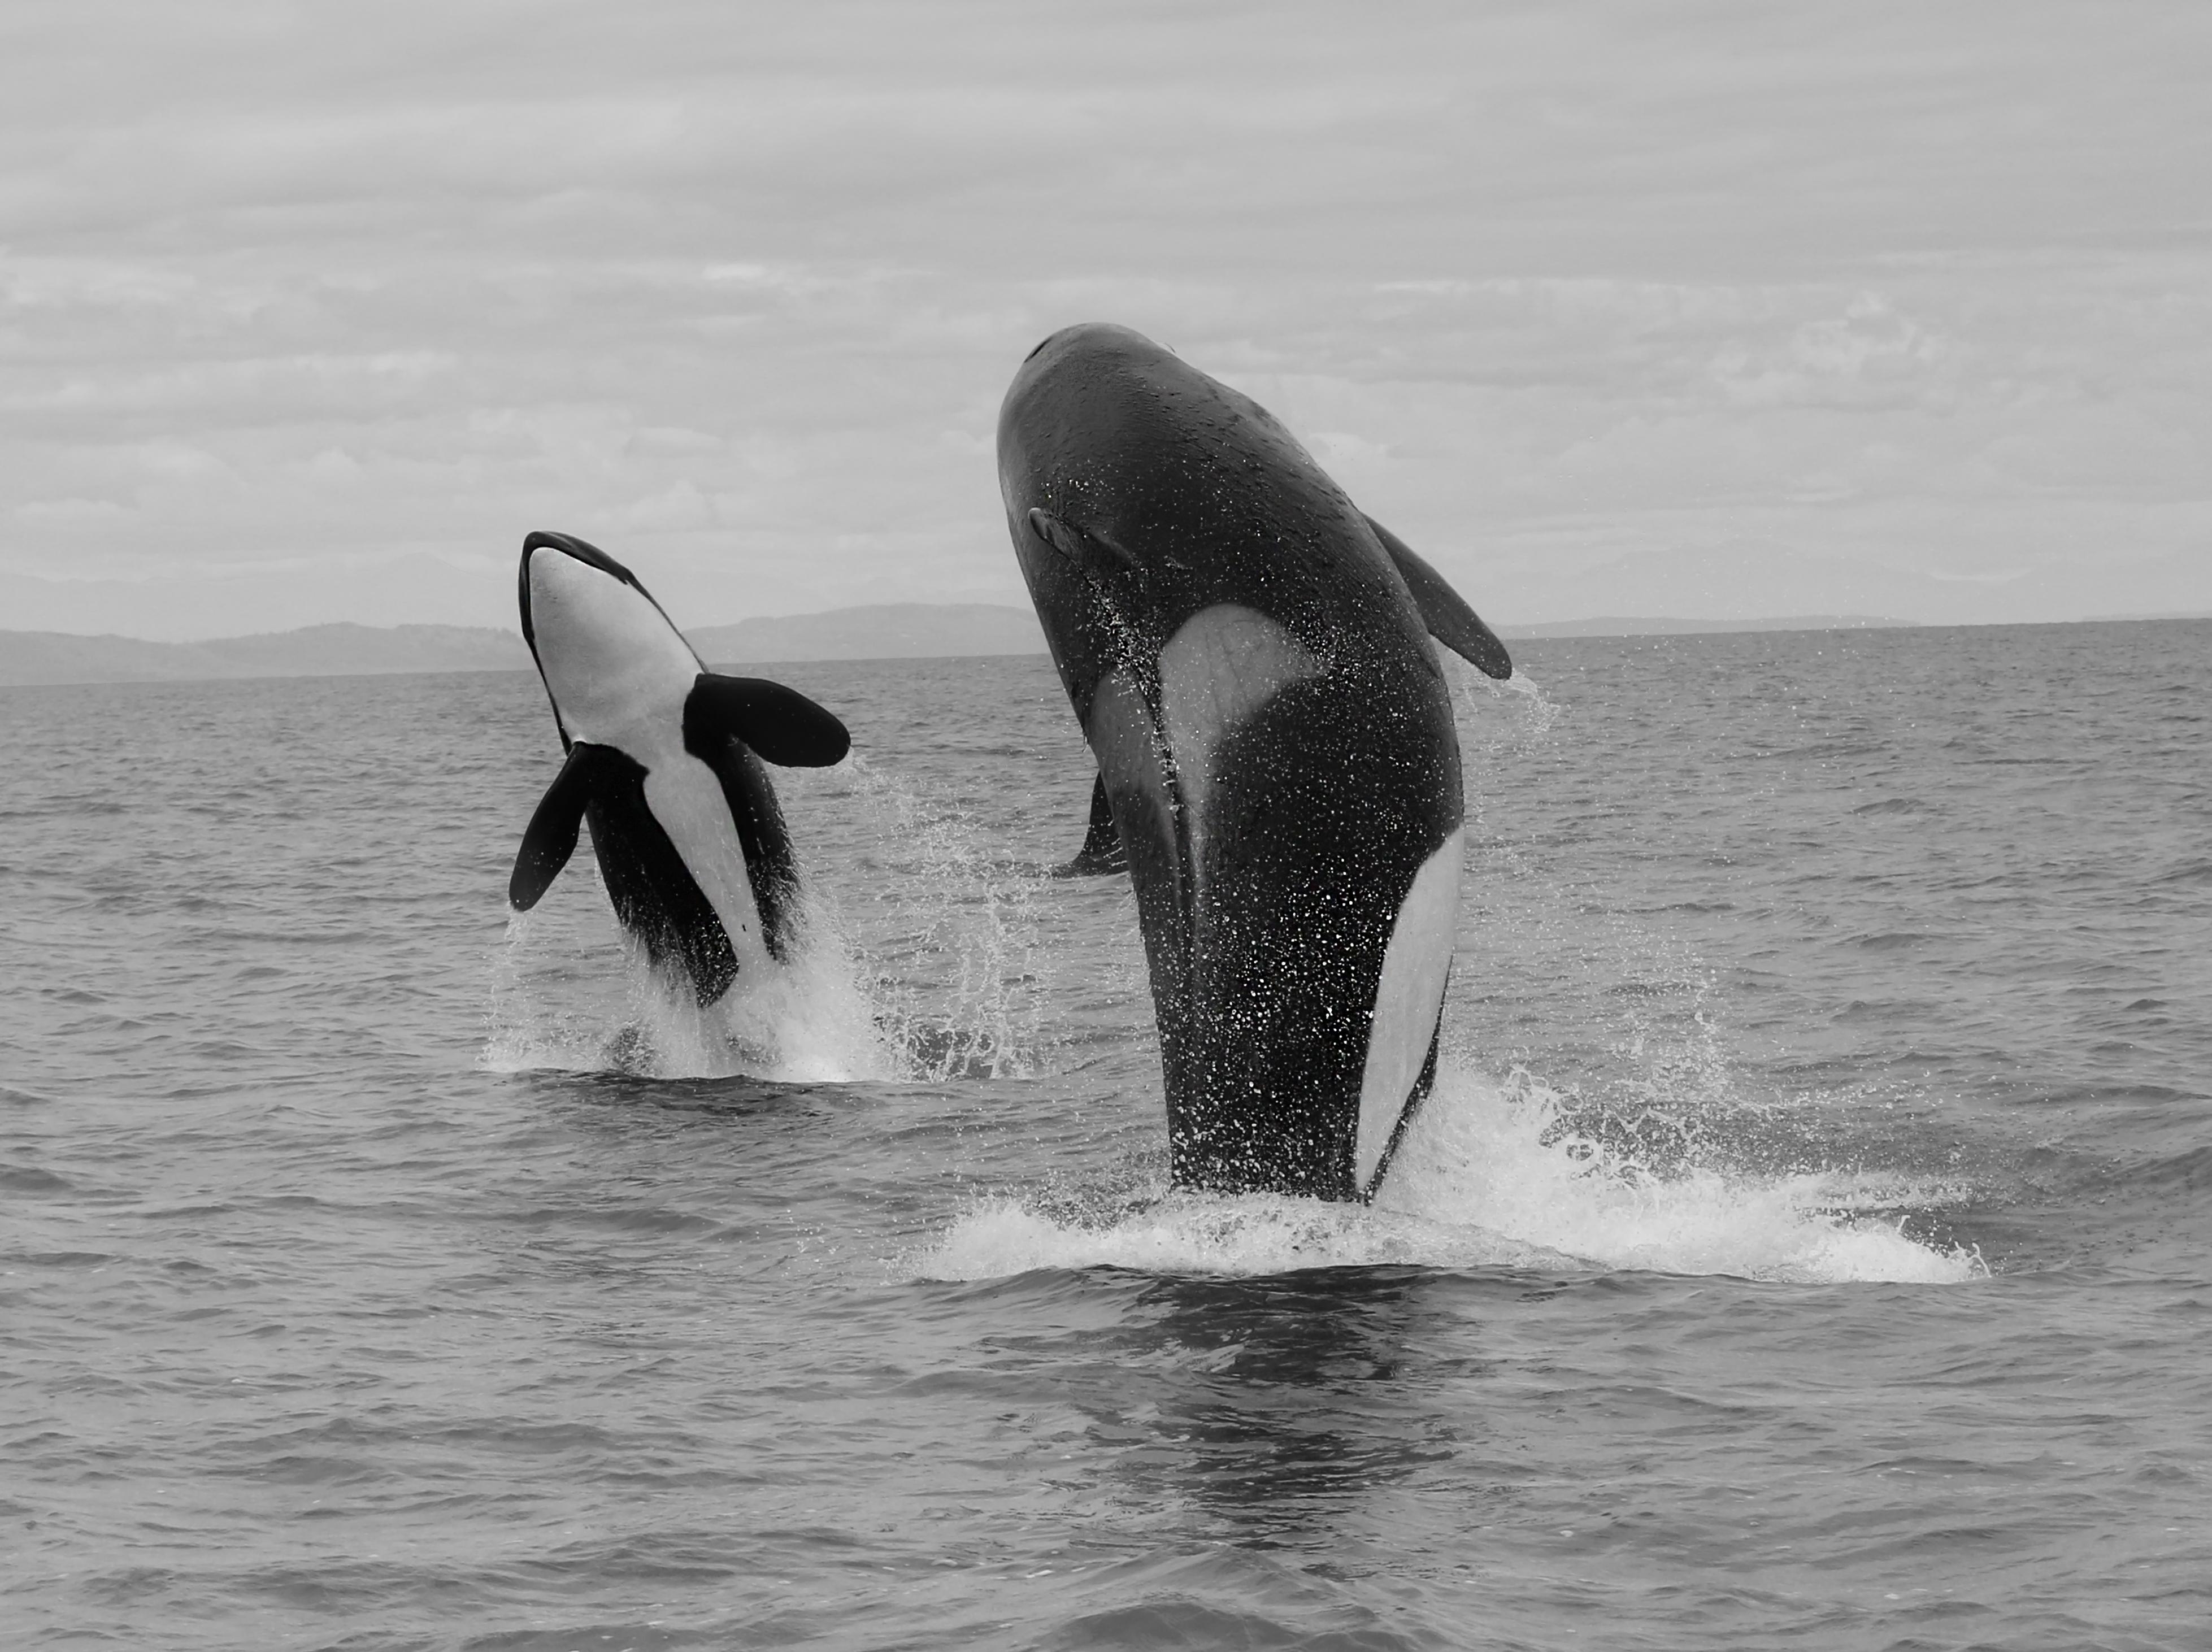  Shot in the off the San Juan Islands this is the only known image of a double synchronized breach with two adult Orcas. 
This is the only time this image has been offered for sale.
50x60
1 of 5 unsigned test prints
Printed on archival paper and